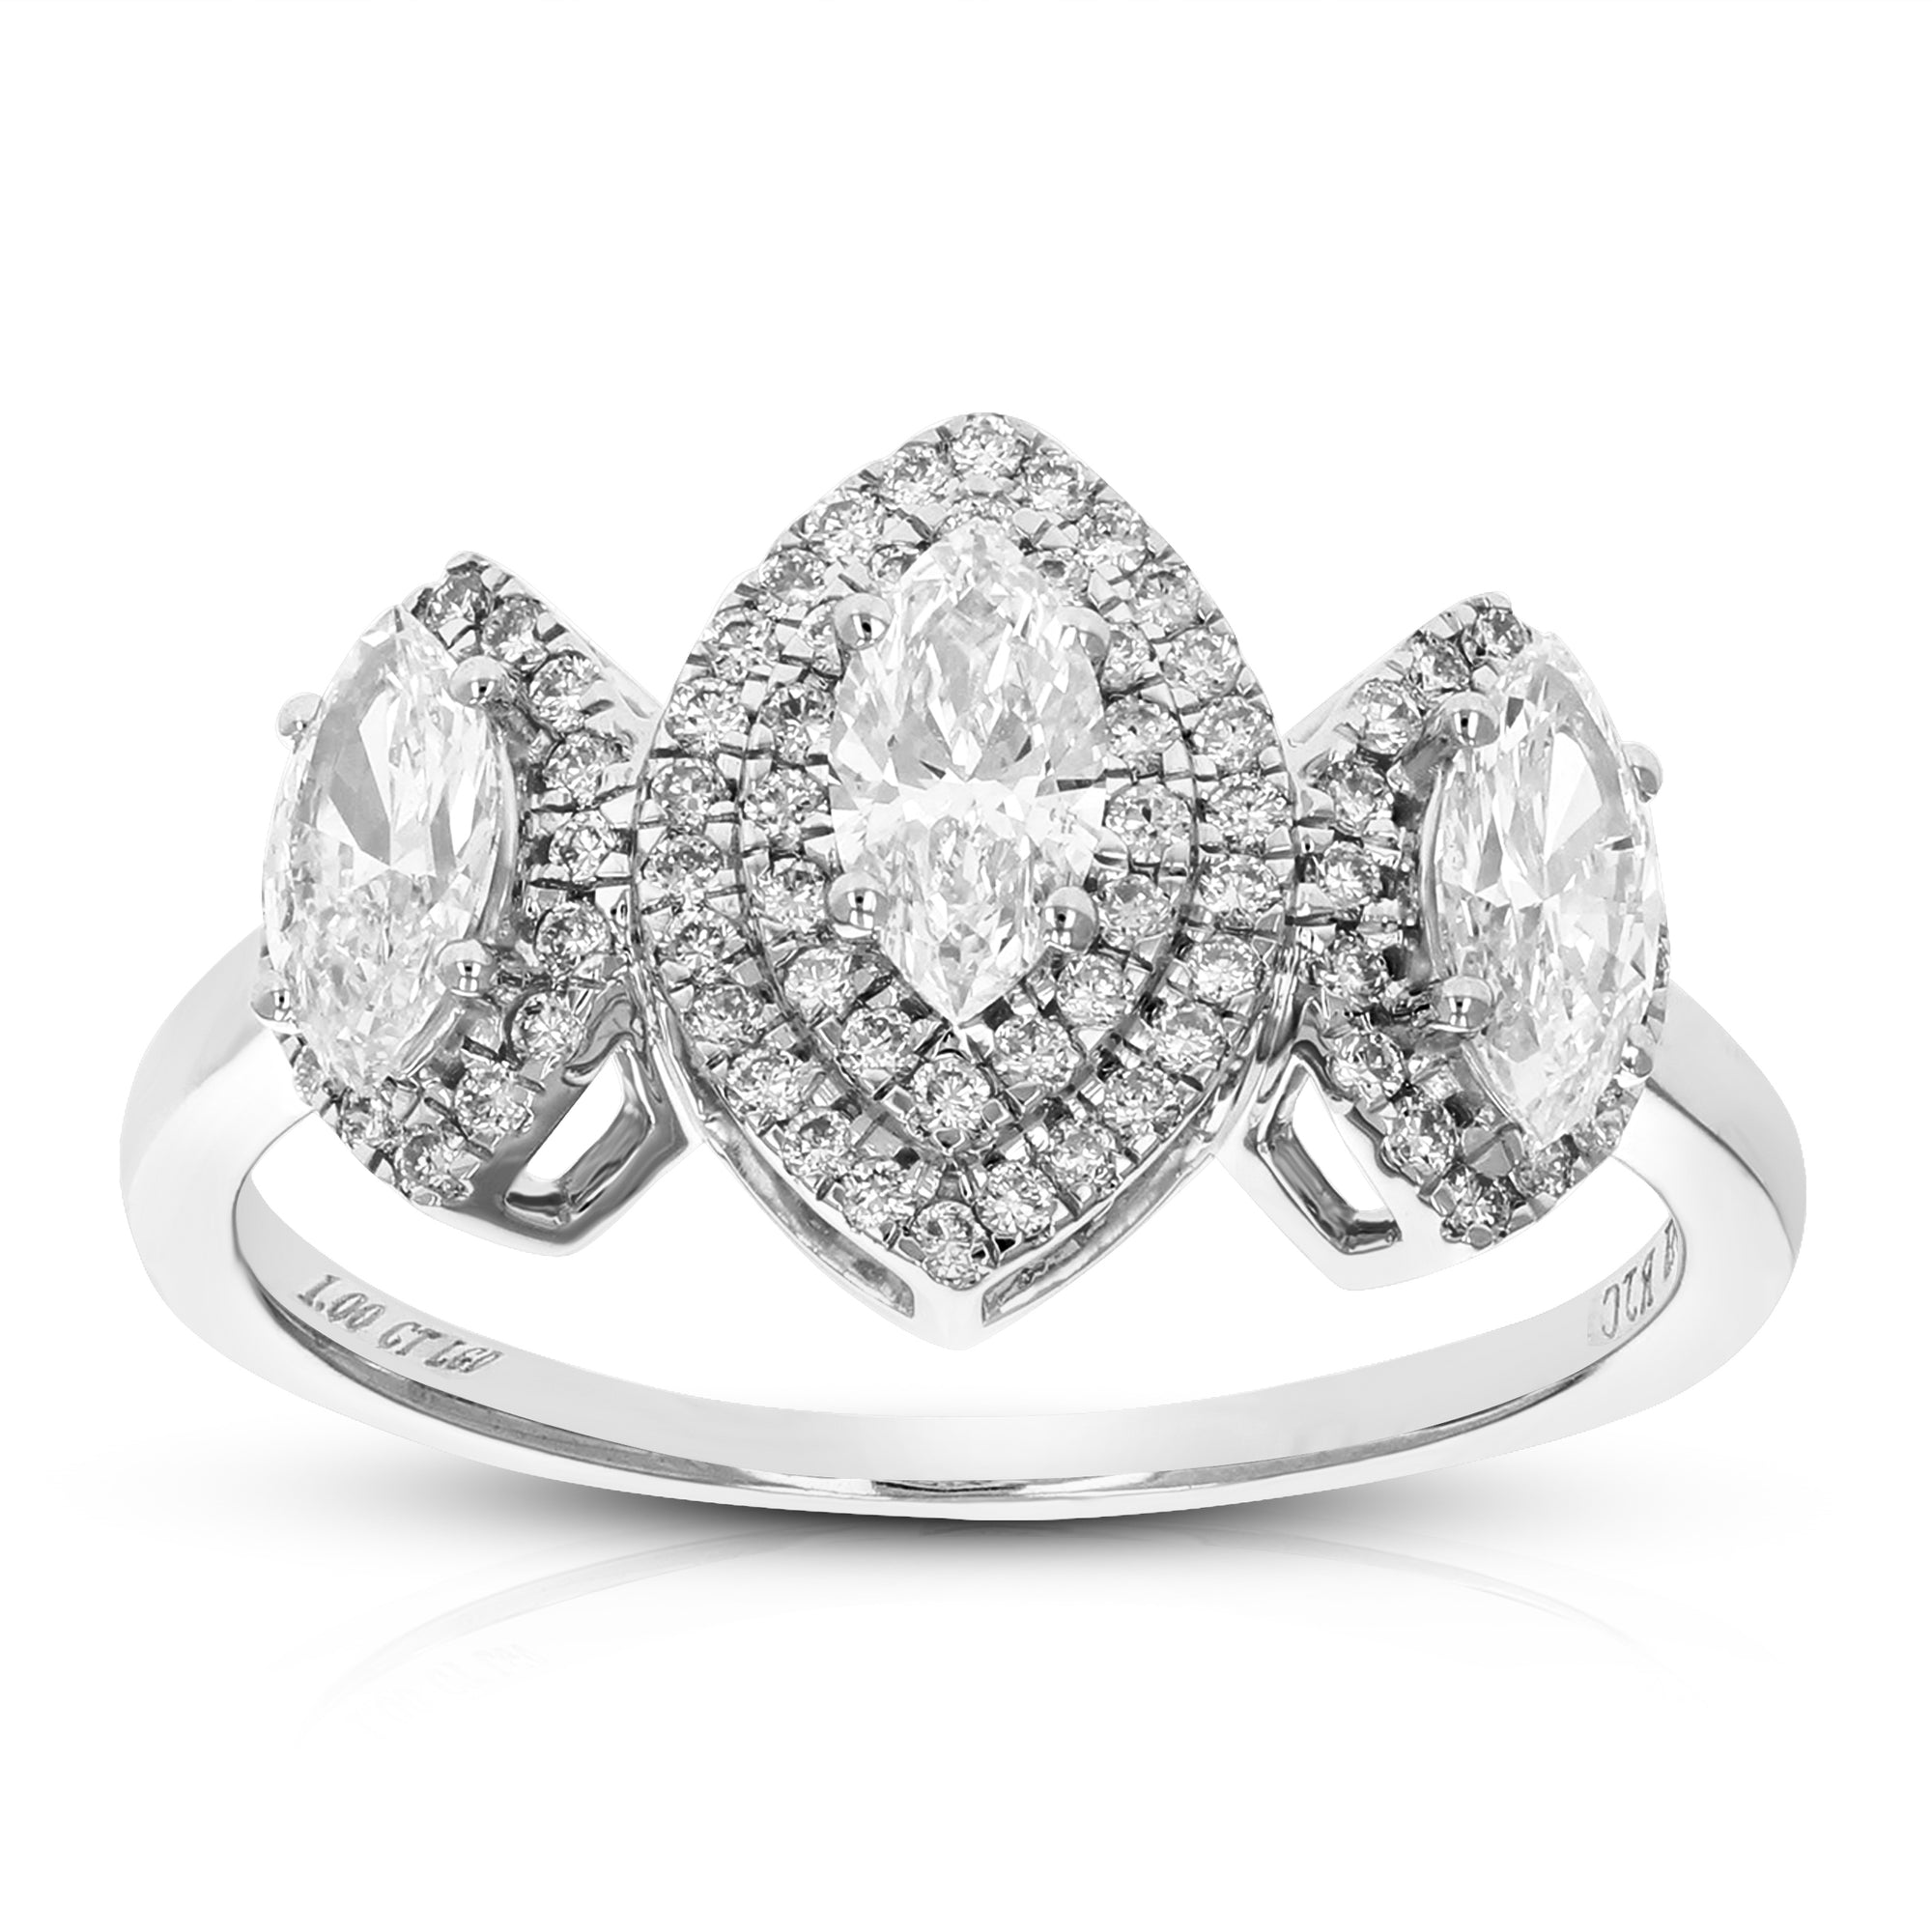 1 cttw Marquise Cut Lab Grown Diamond Engagement Ring 77 Stones 14K White Gold Prong Set 2/3 Inch